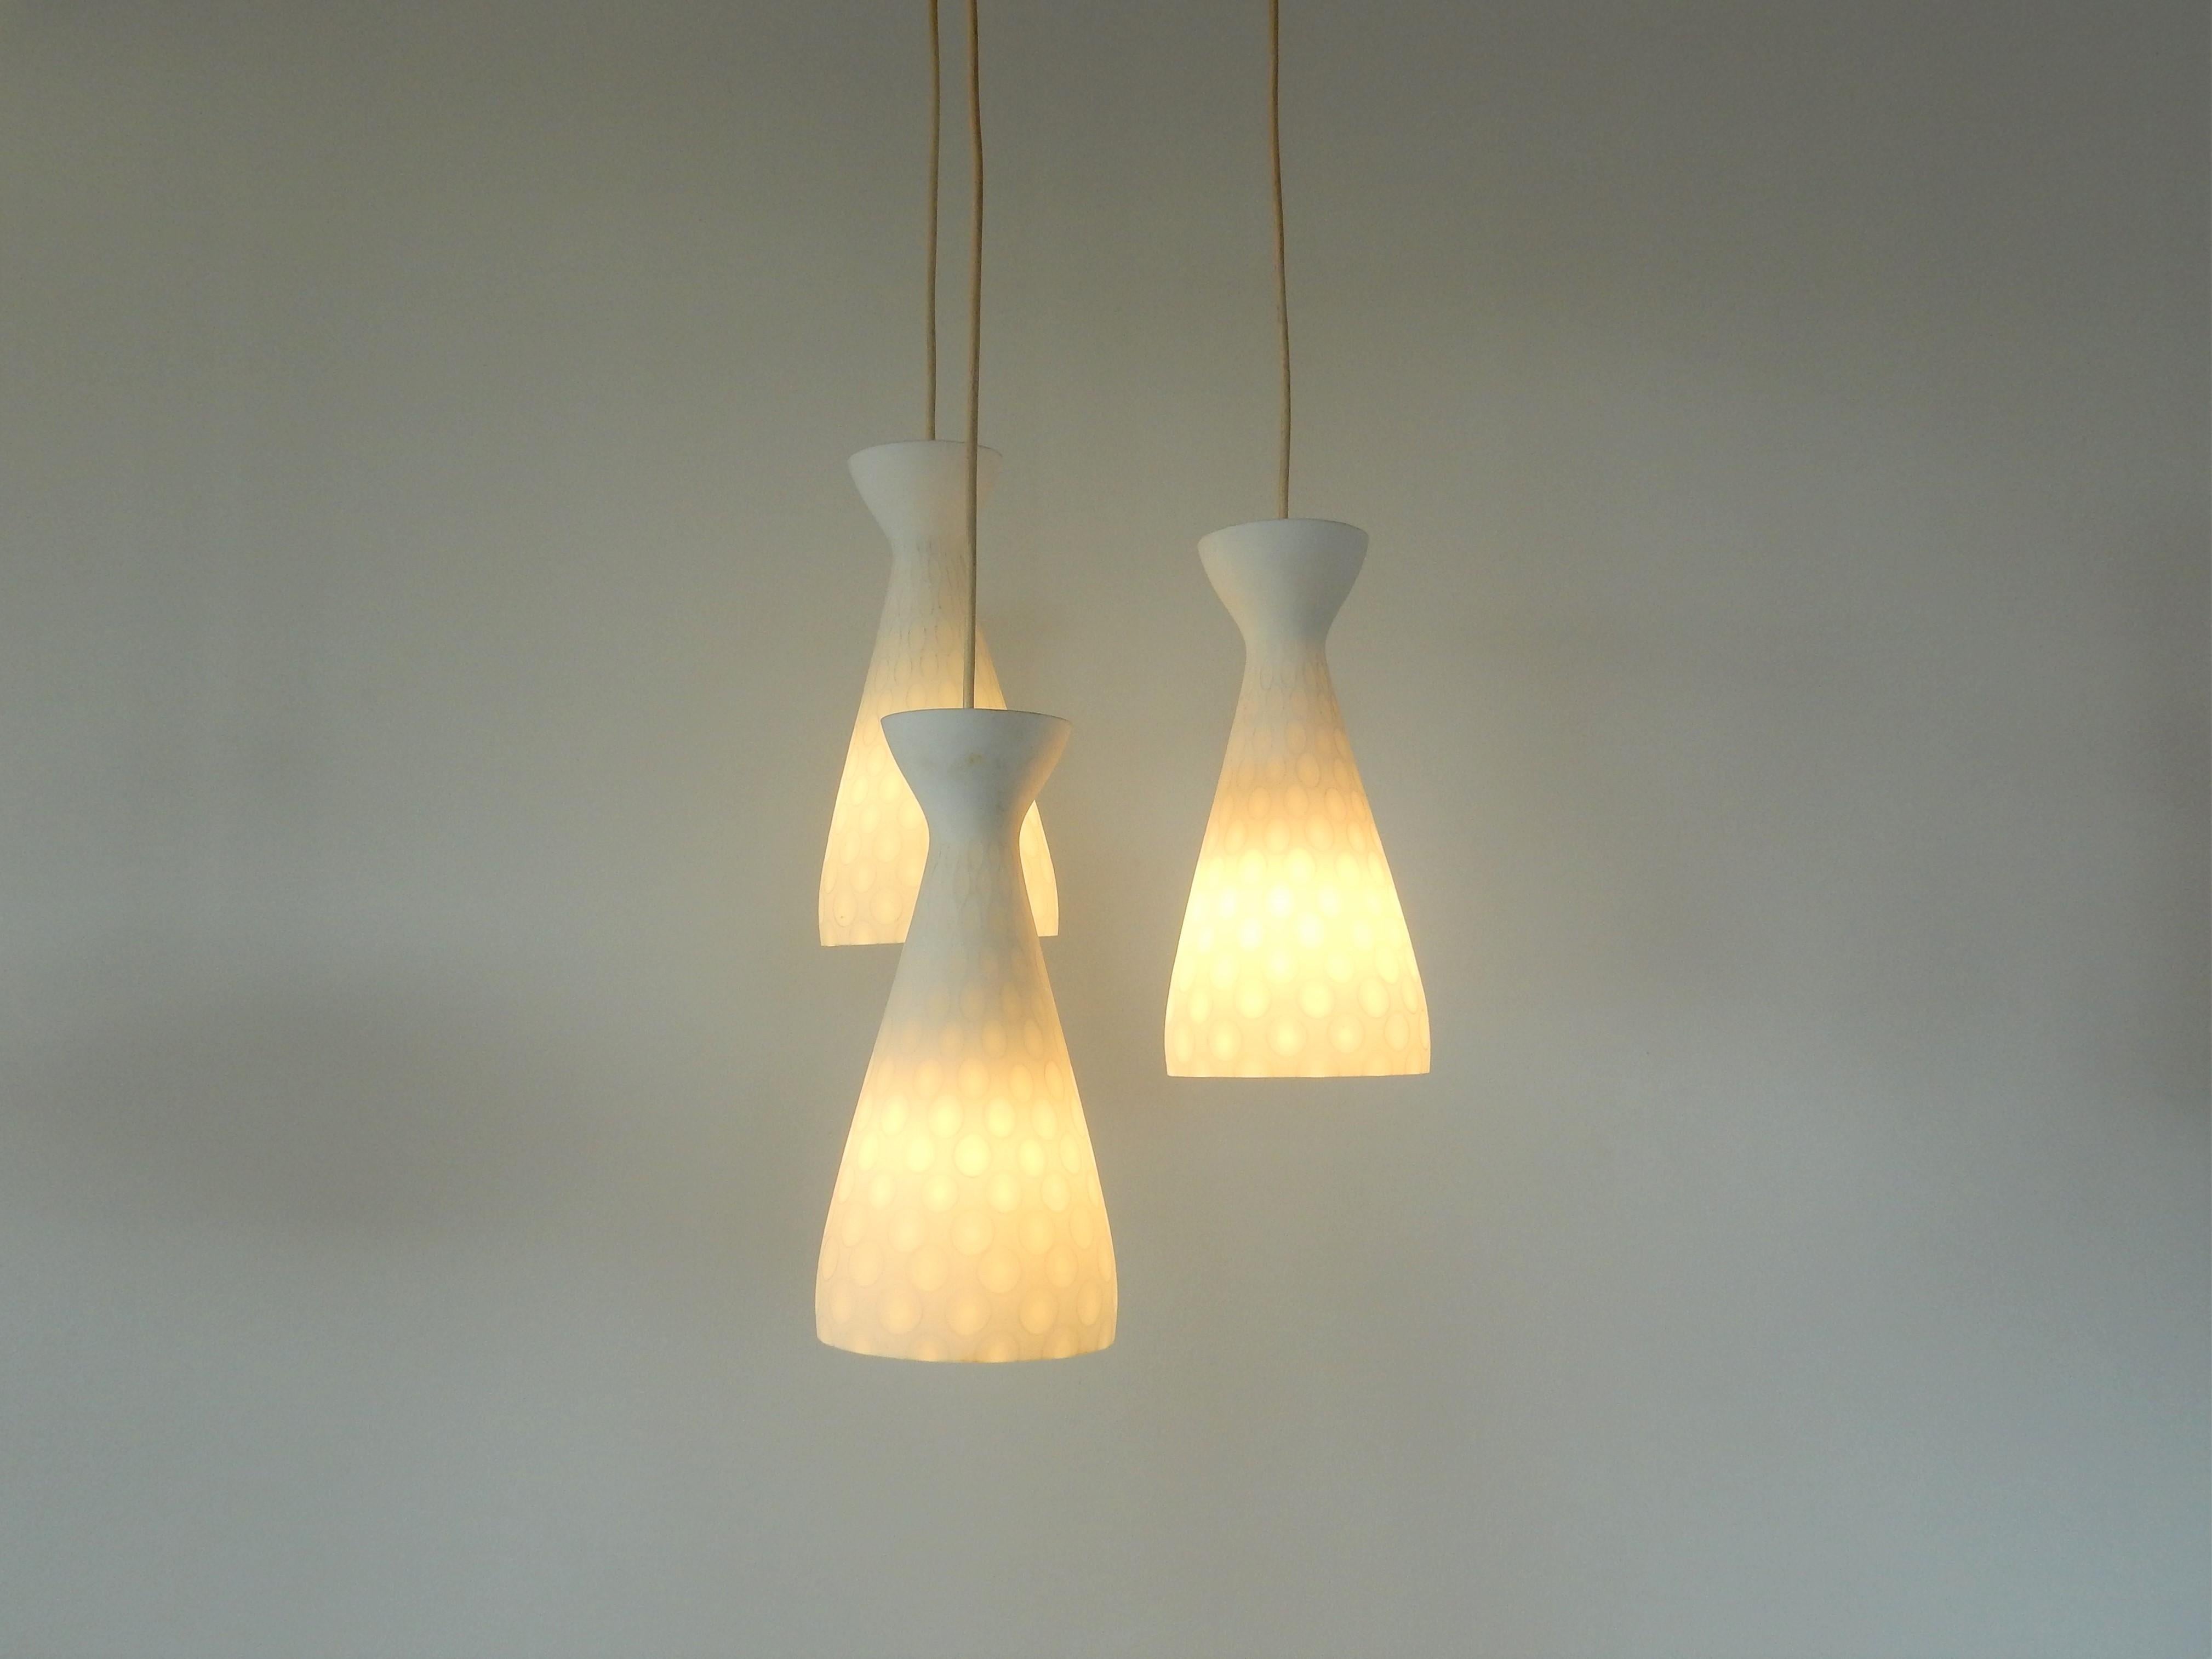 Mid-20th Century Set of 3 Ibiza pendant lamps by Aloys Gangkofner for Peill & Putzler